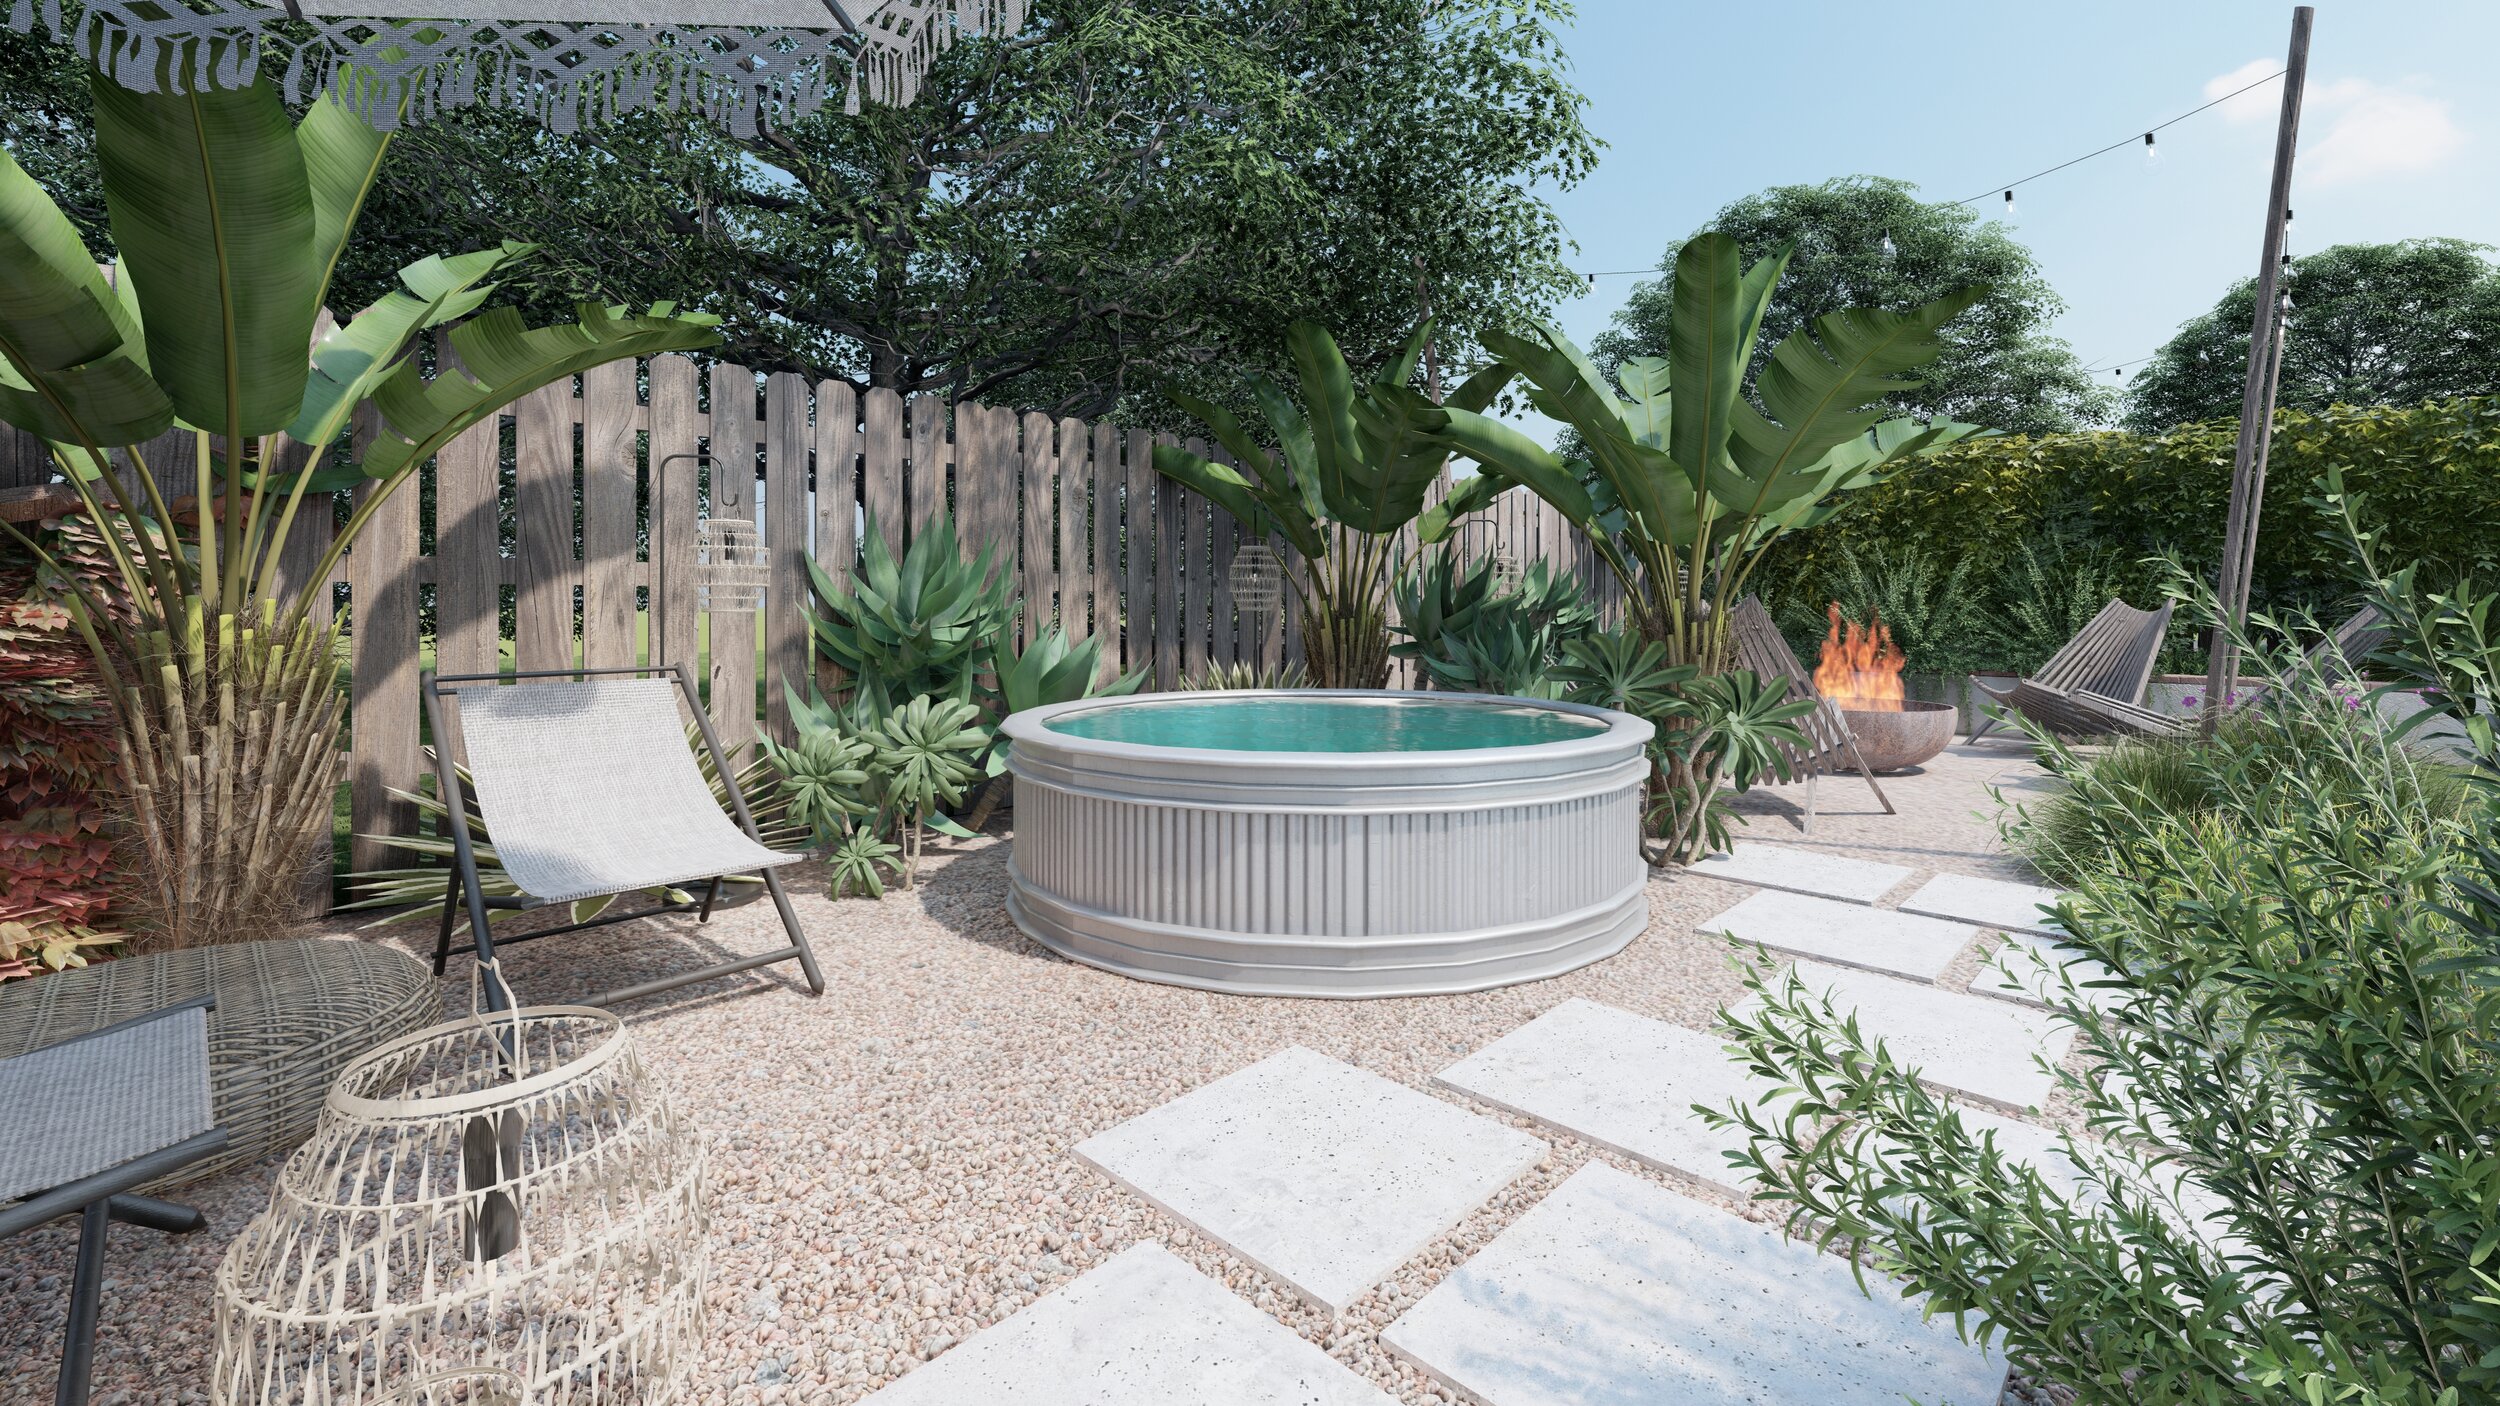 Tropical backyard with stock tank pool near paver pathway with gravel